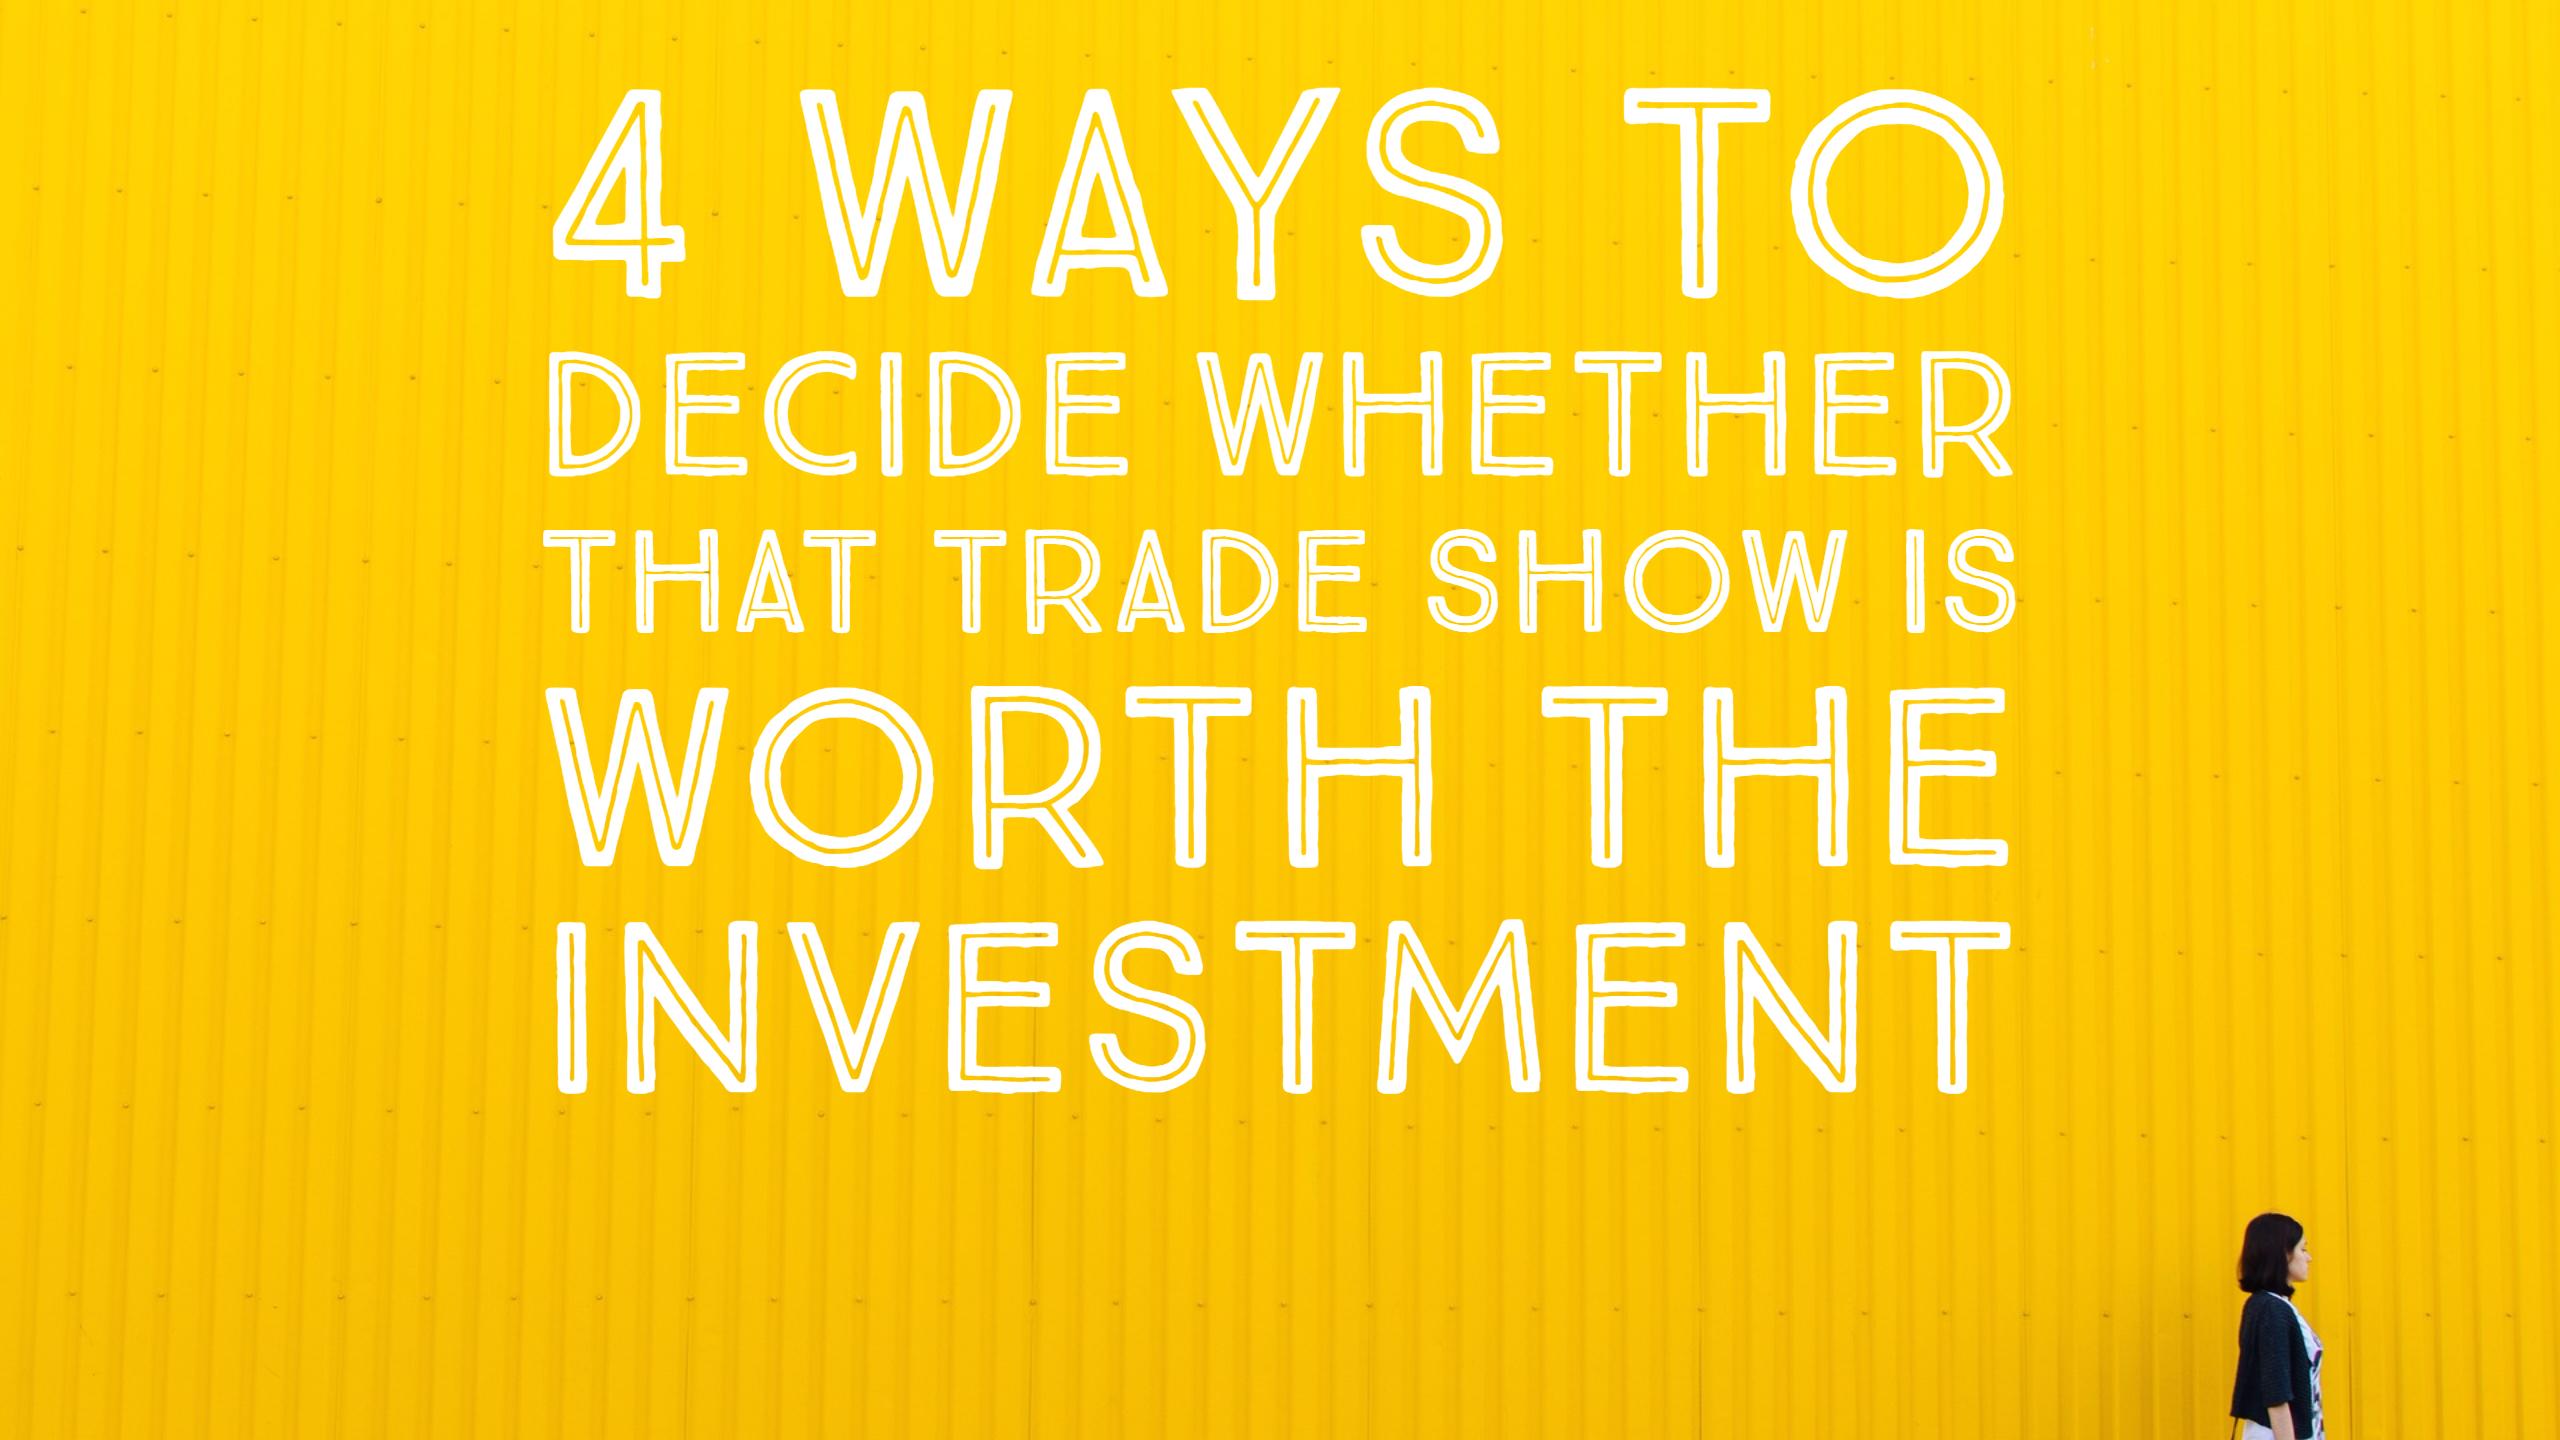 4 Ways to Decide Whether that Trade Show Is Worth the Investment